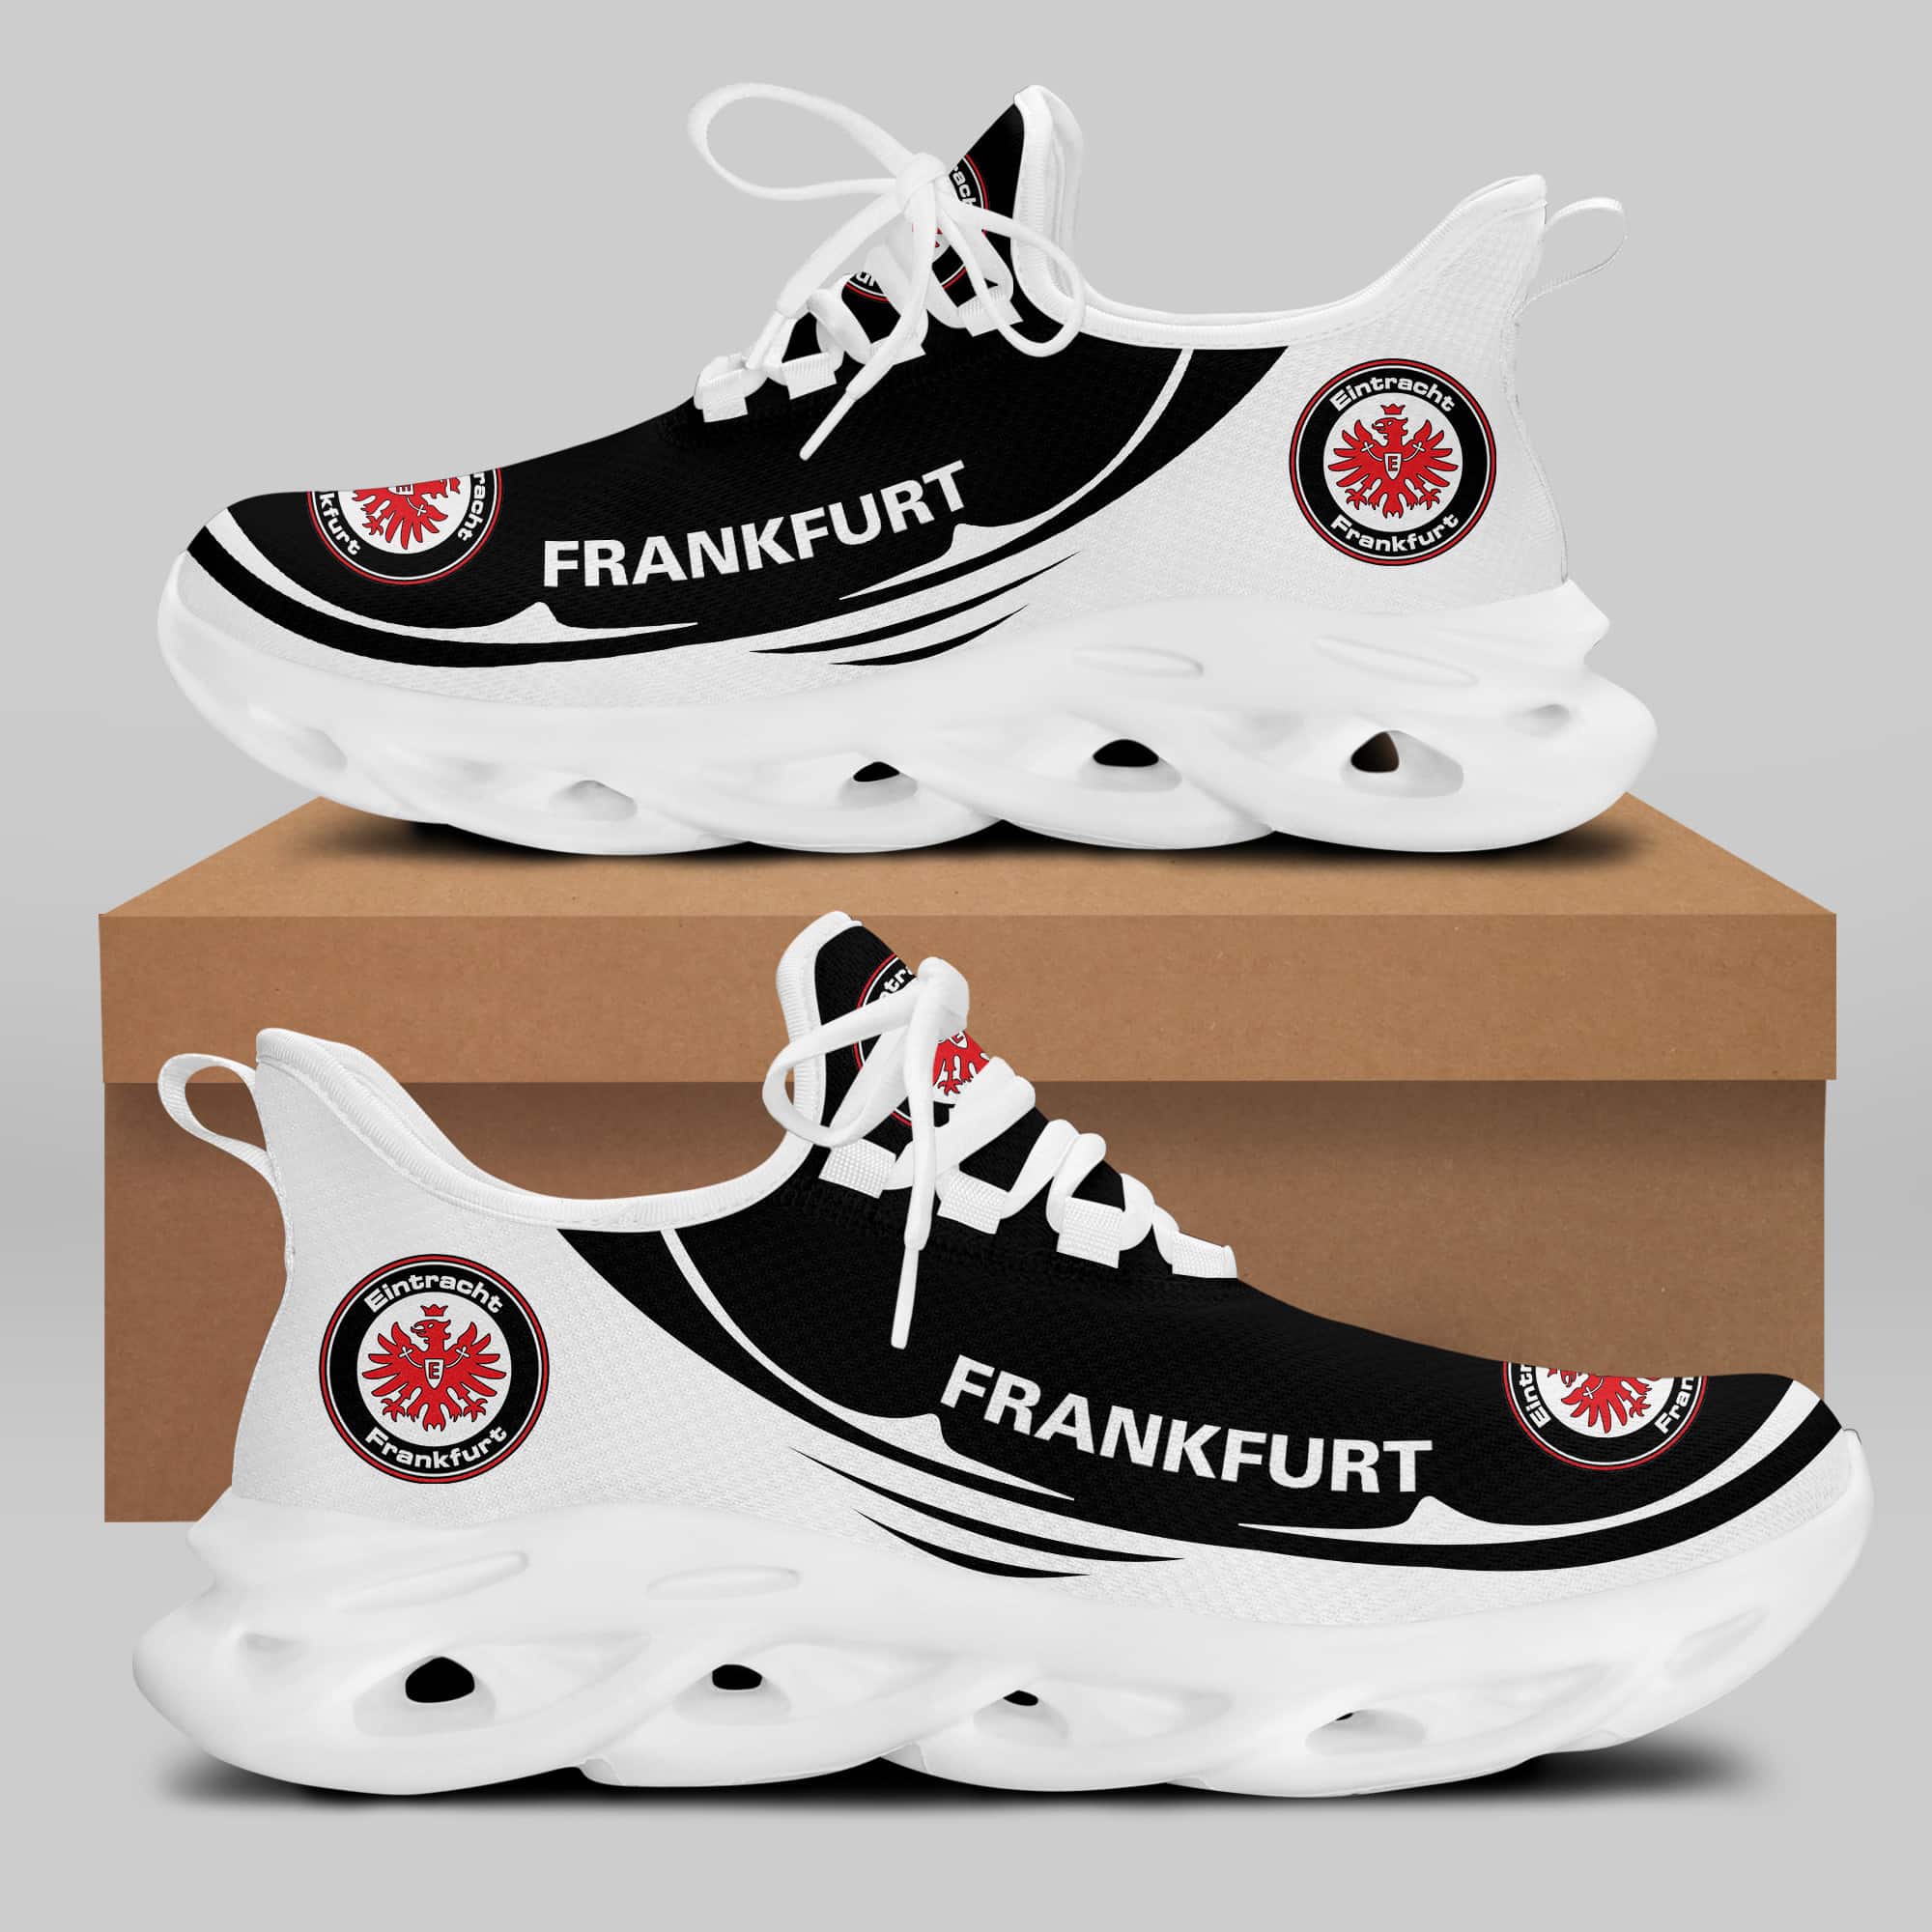 Eintracht Frankfurt Running Shoes Max Soul Shoes Sneakers Ver 21 1